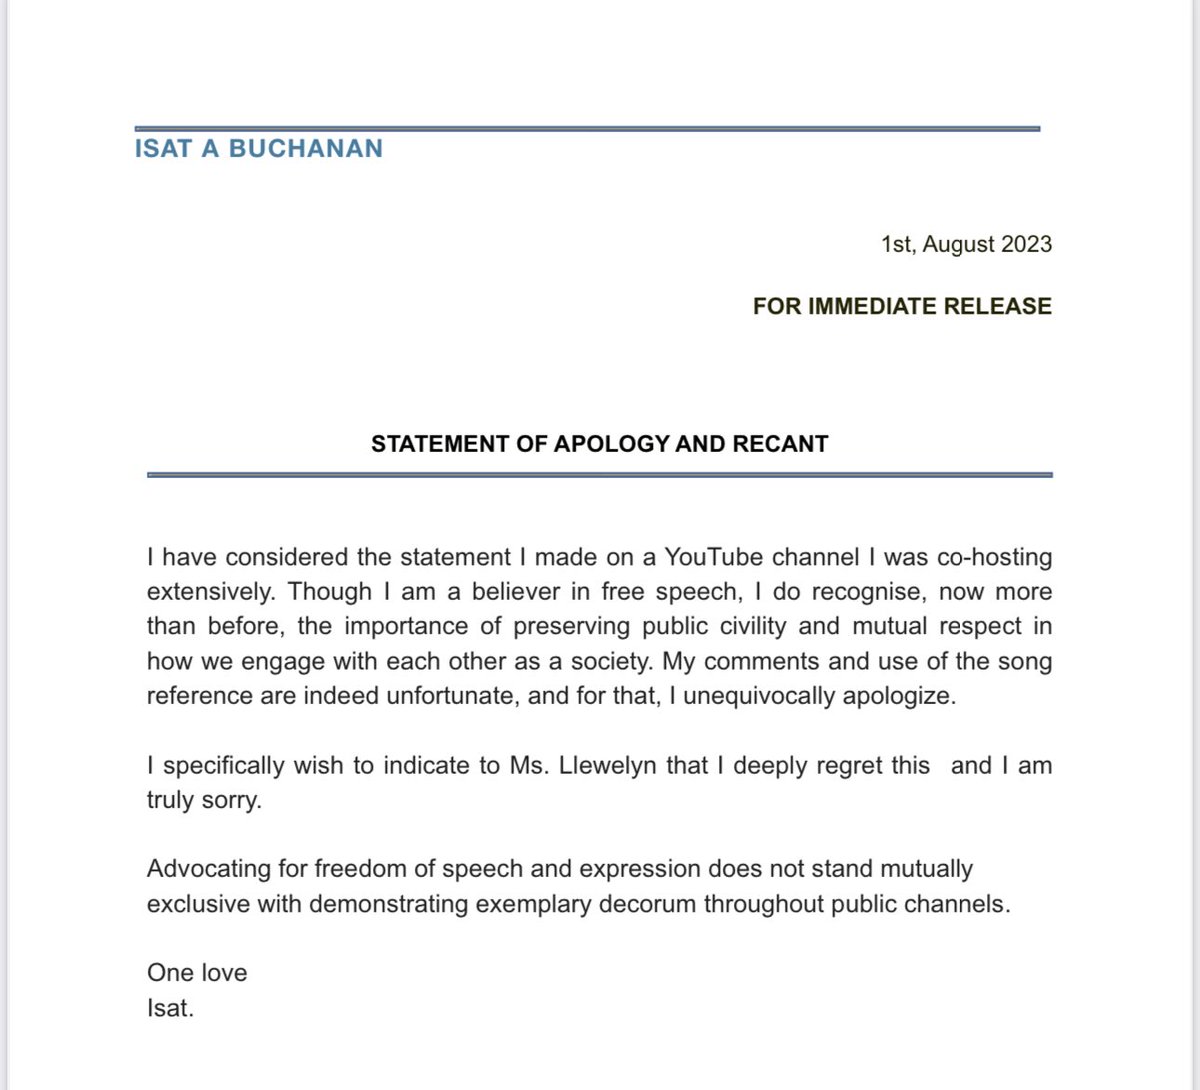 Statement of Apology and Recant